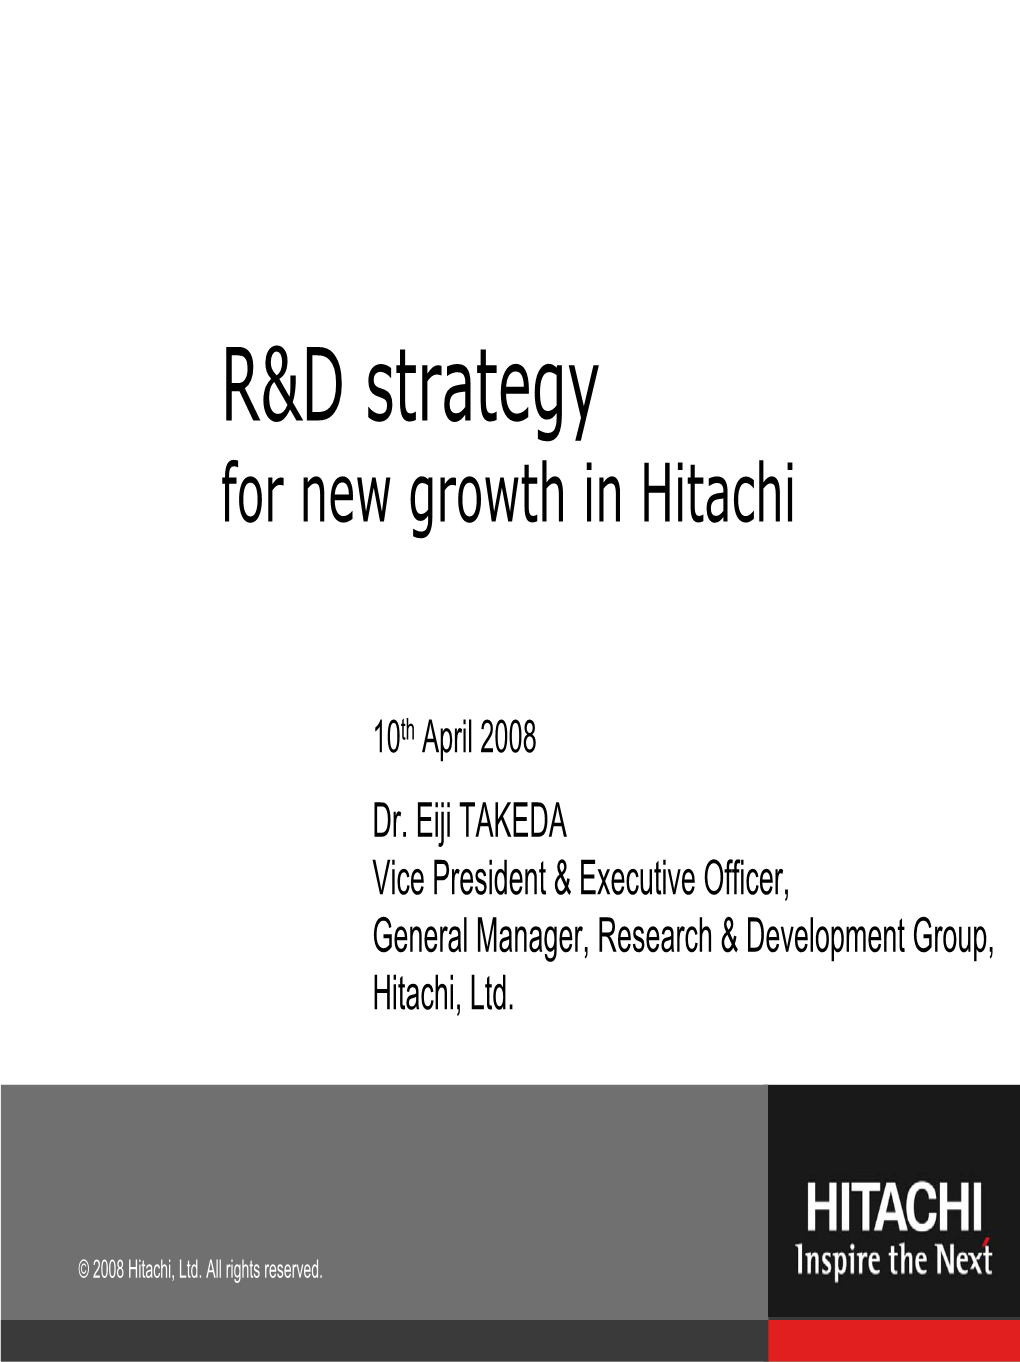 R&D Strategy for New Growth in Hitachi